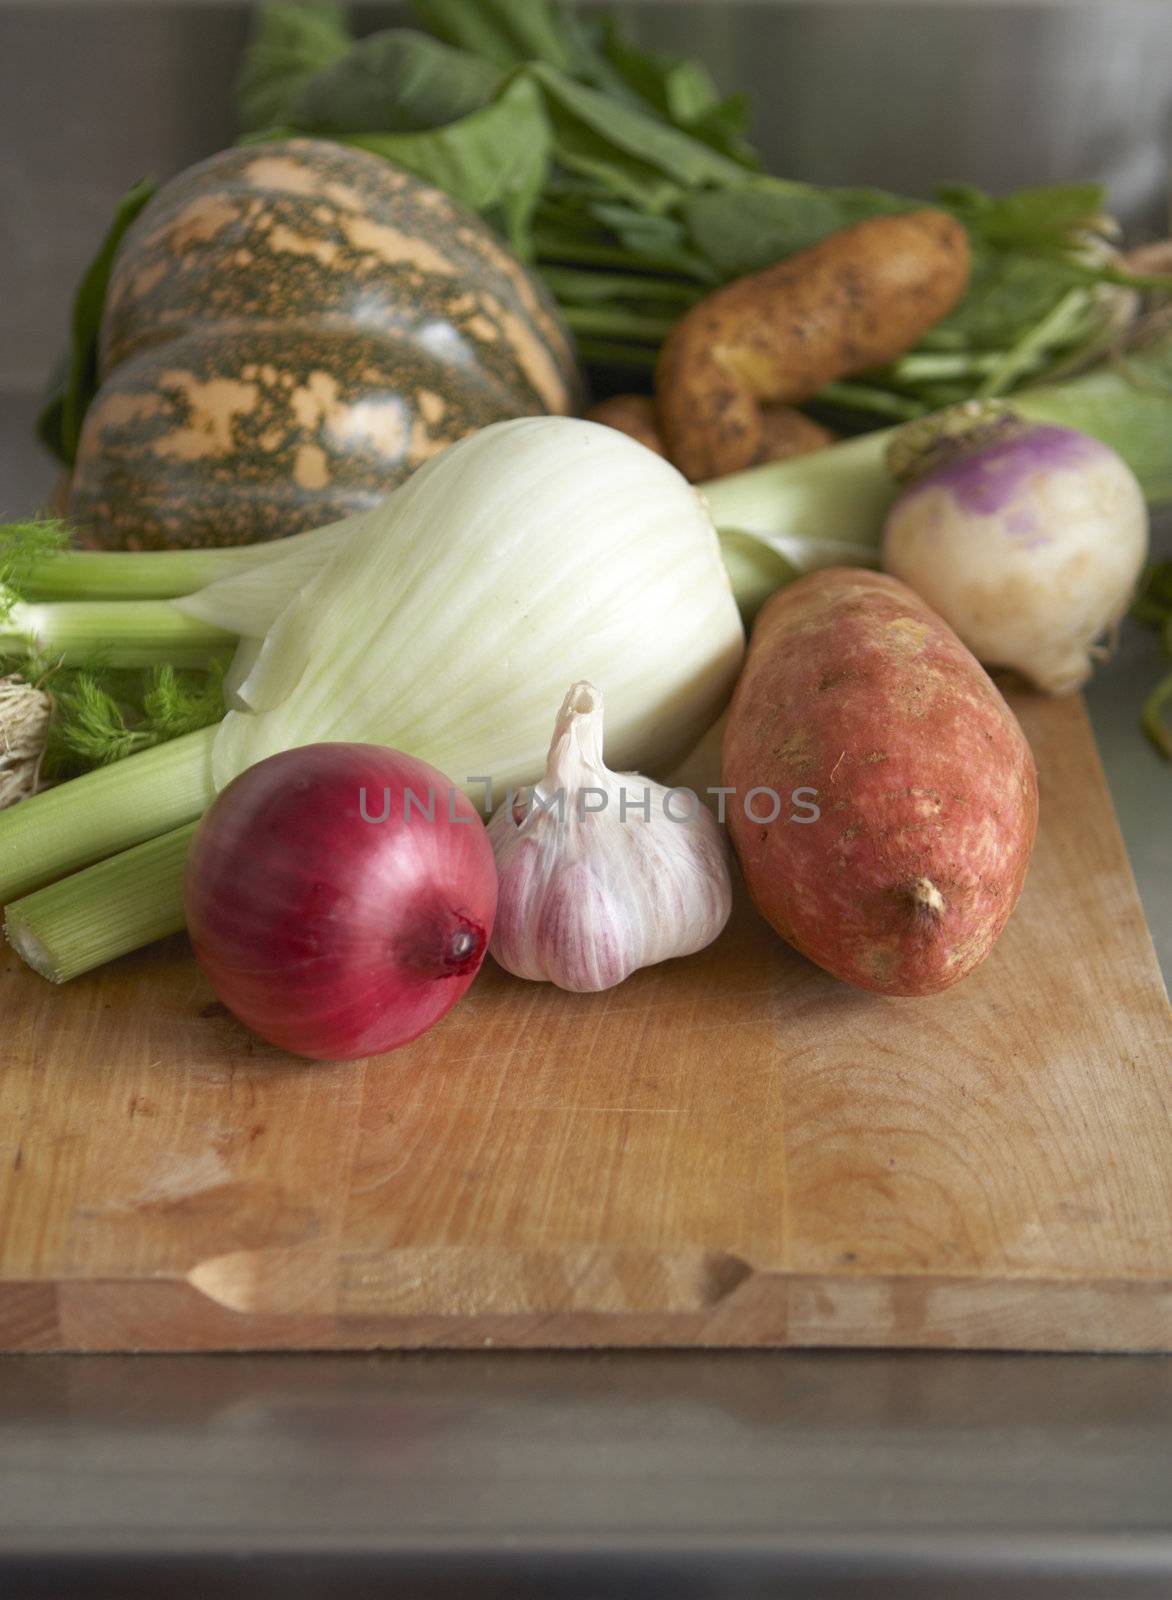 Still life of winter vegetables on wooden chopping board. Stainless steel bench in background